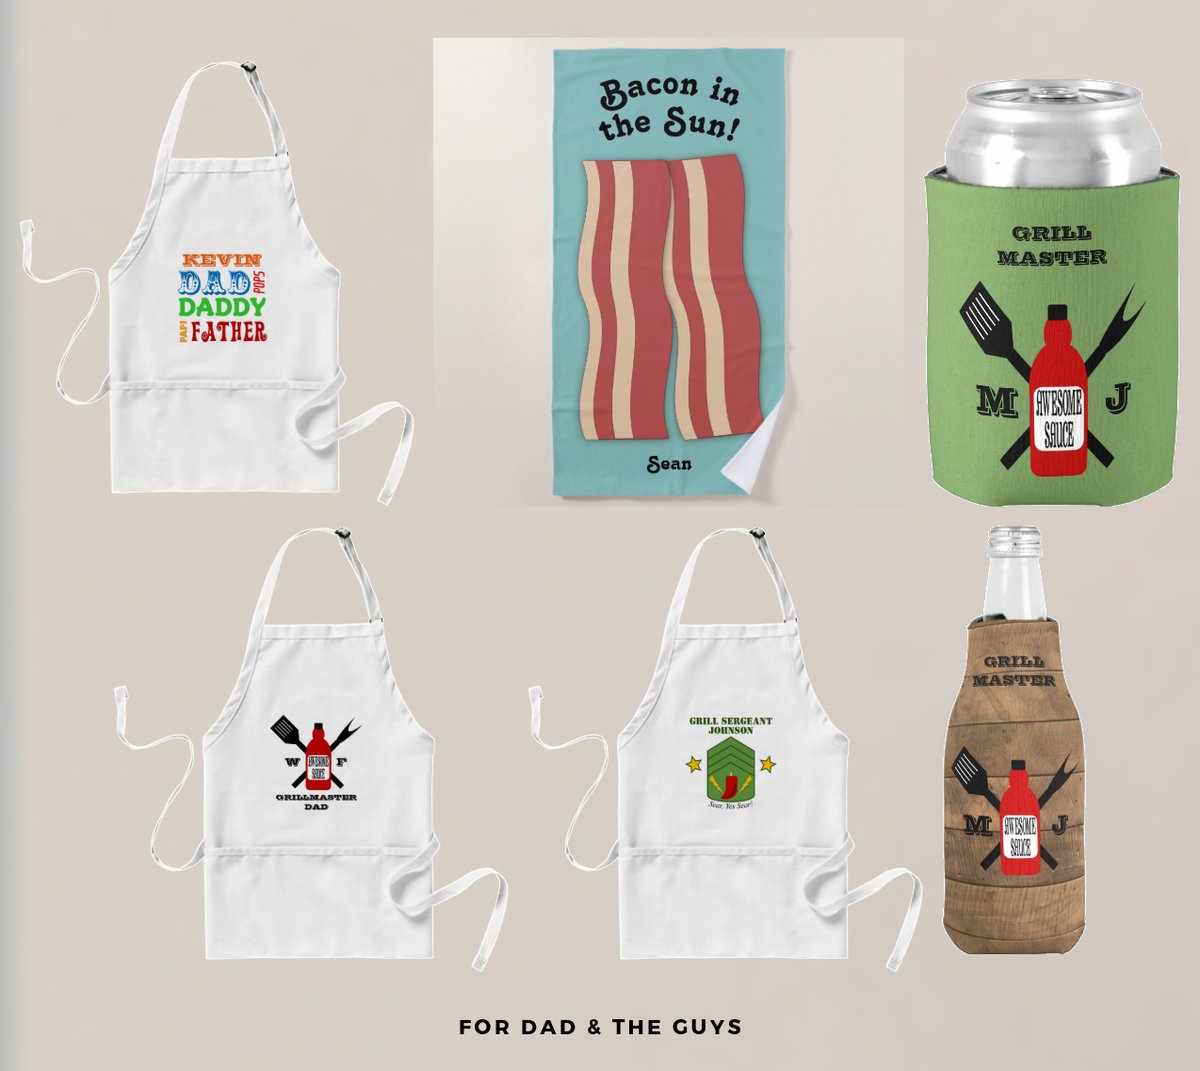 Gifts for Dad 🍔🥩🥤
40% Off Can Cozies, Beach Towels, Aprons & More  -  Use Code: OUTDOORSTYLE
#GiftsforDad #FathersDay #FathersDayGifts #GrillingApron #CanCozy #BeachTowel
zazzle.com/collections/fo…